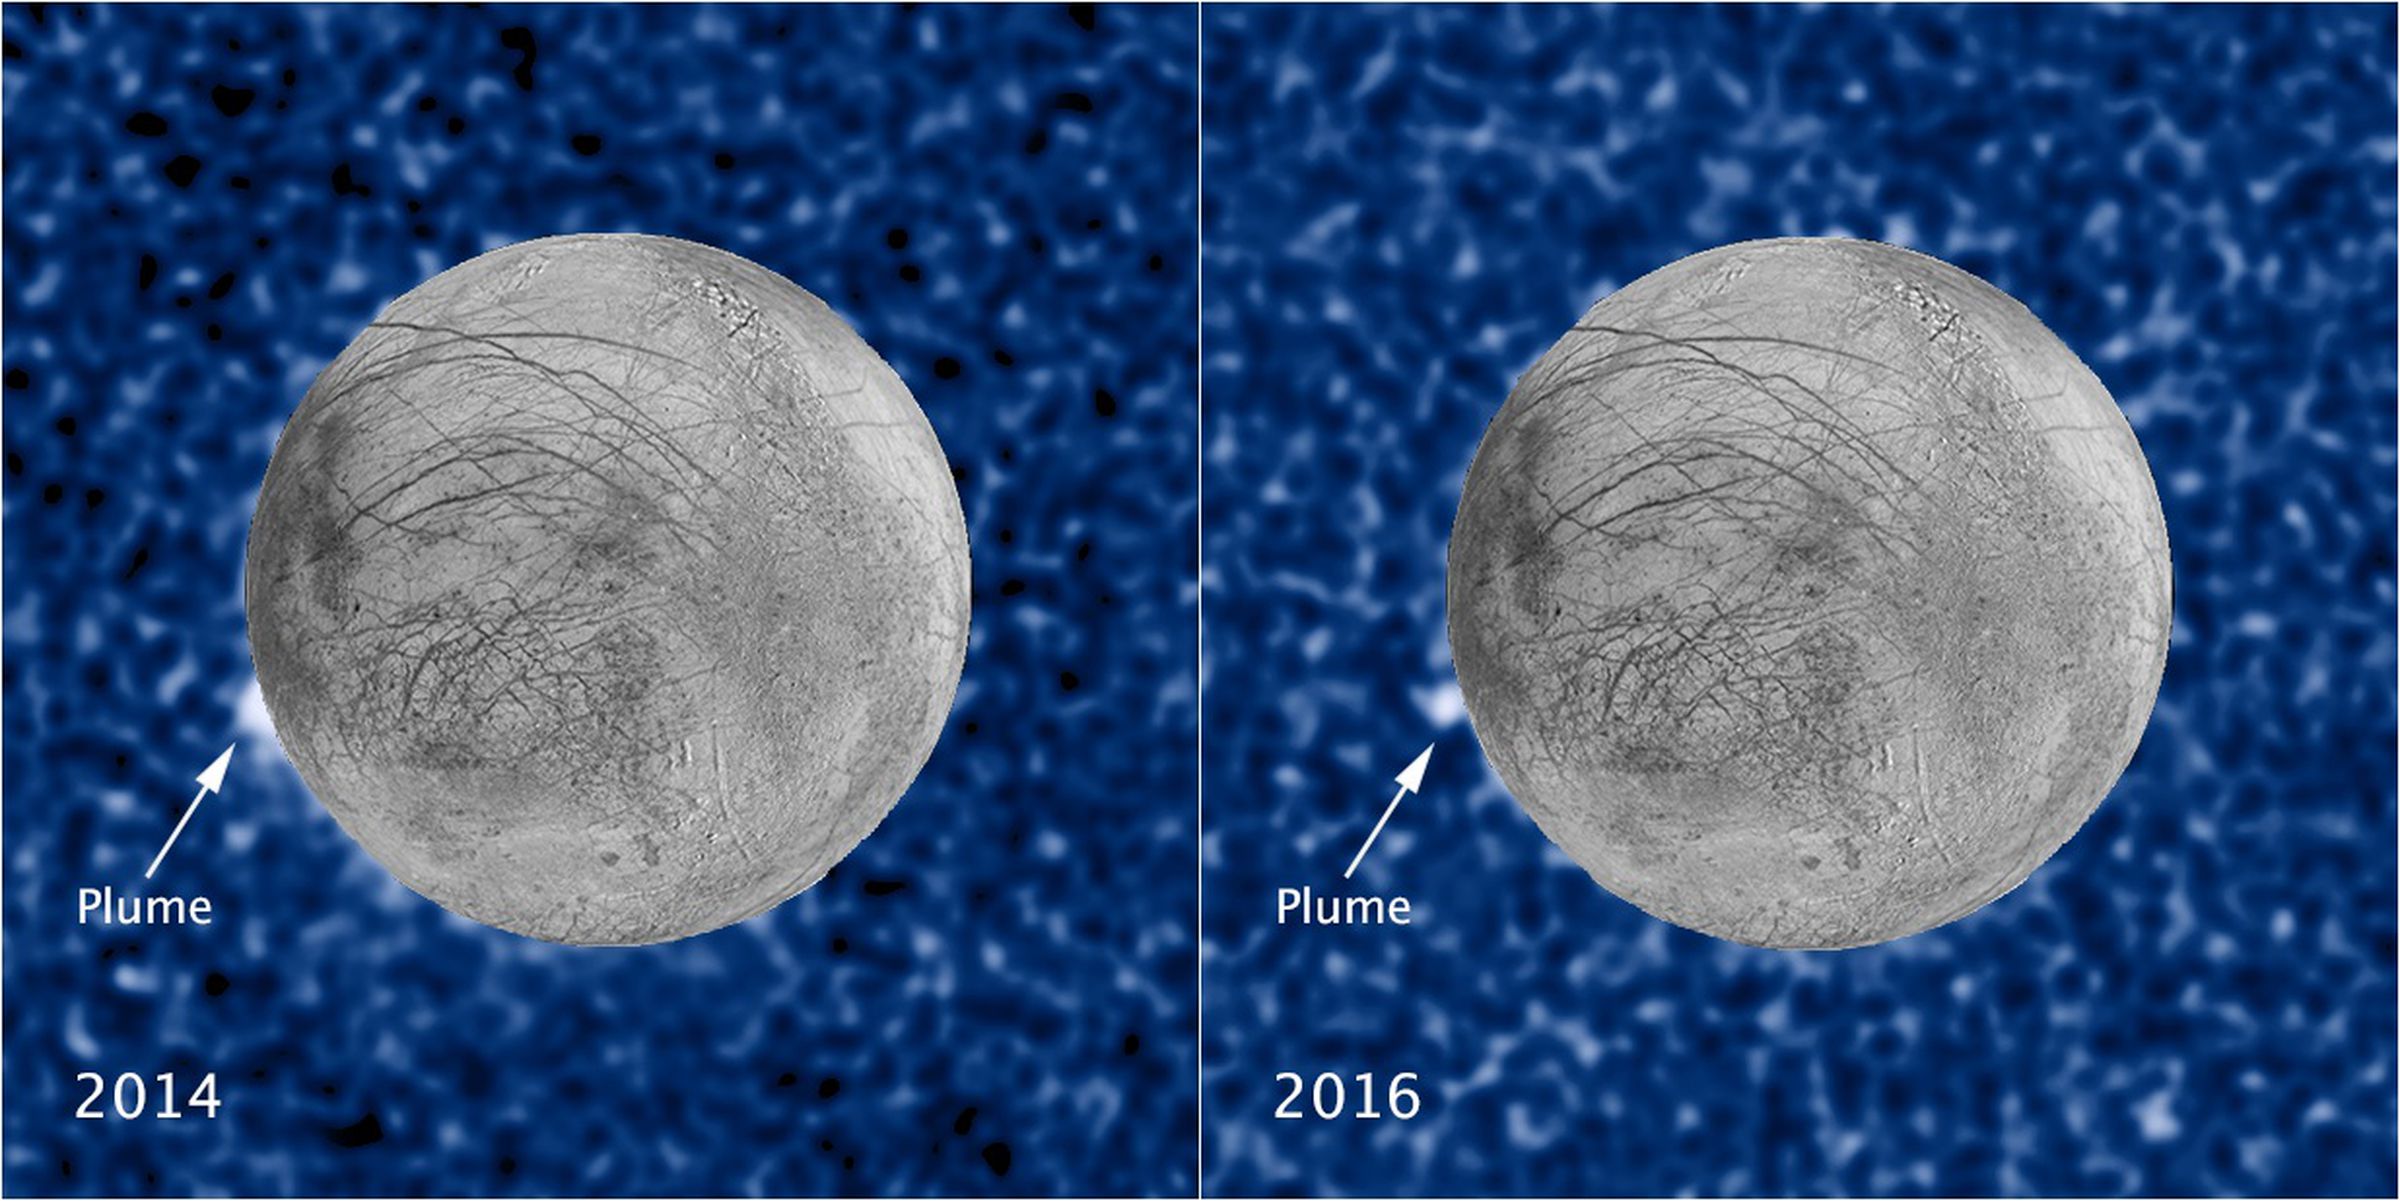 The two potential plumes on Europa spotted by Hubble.